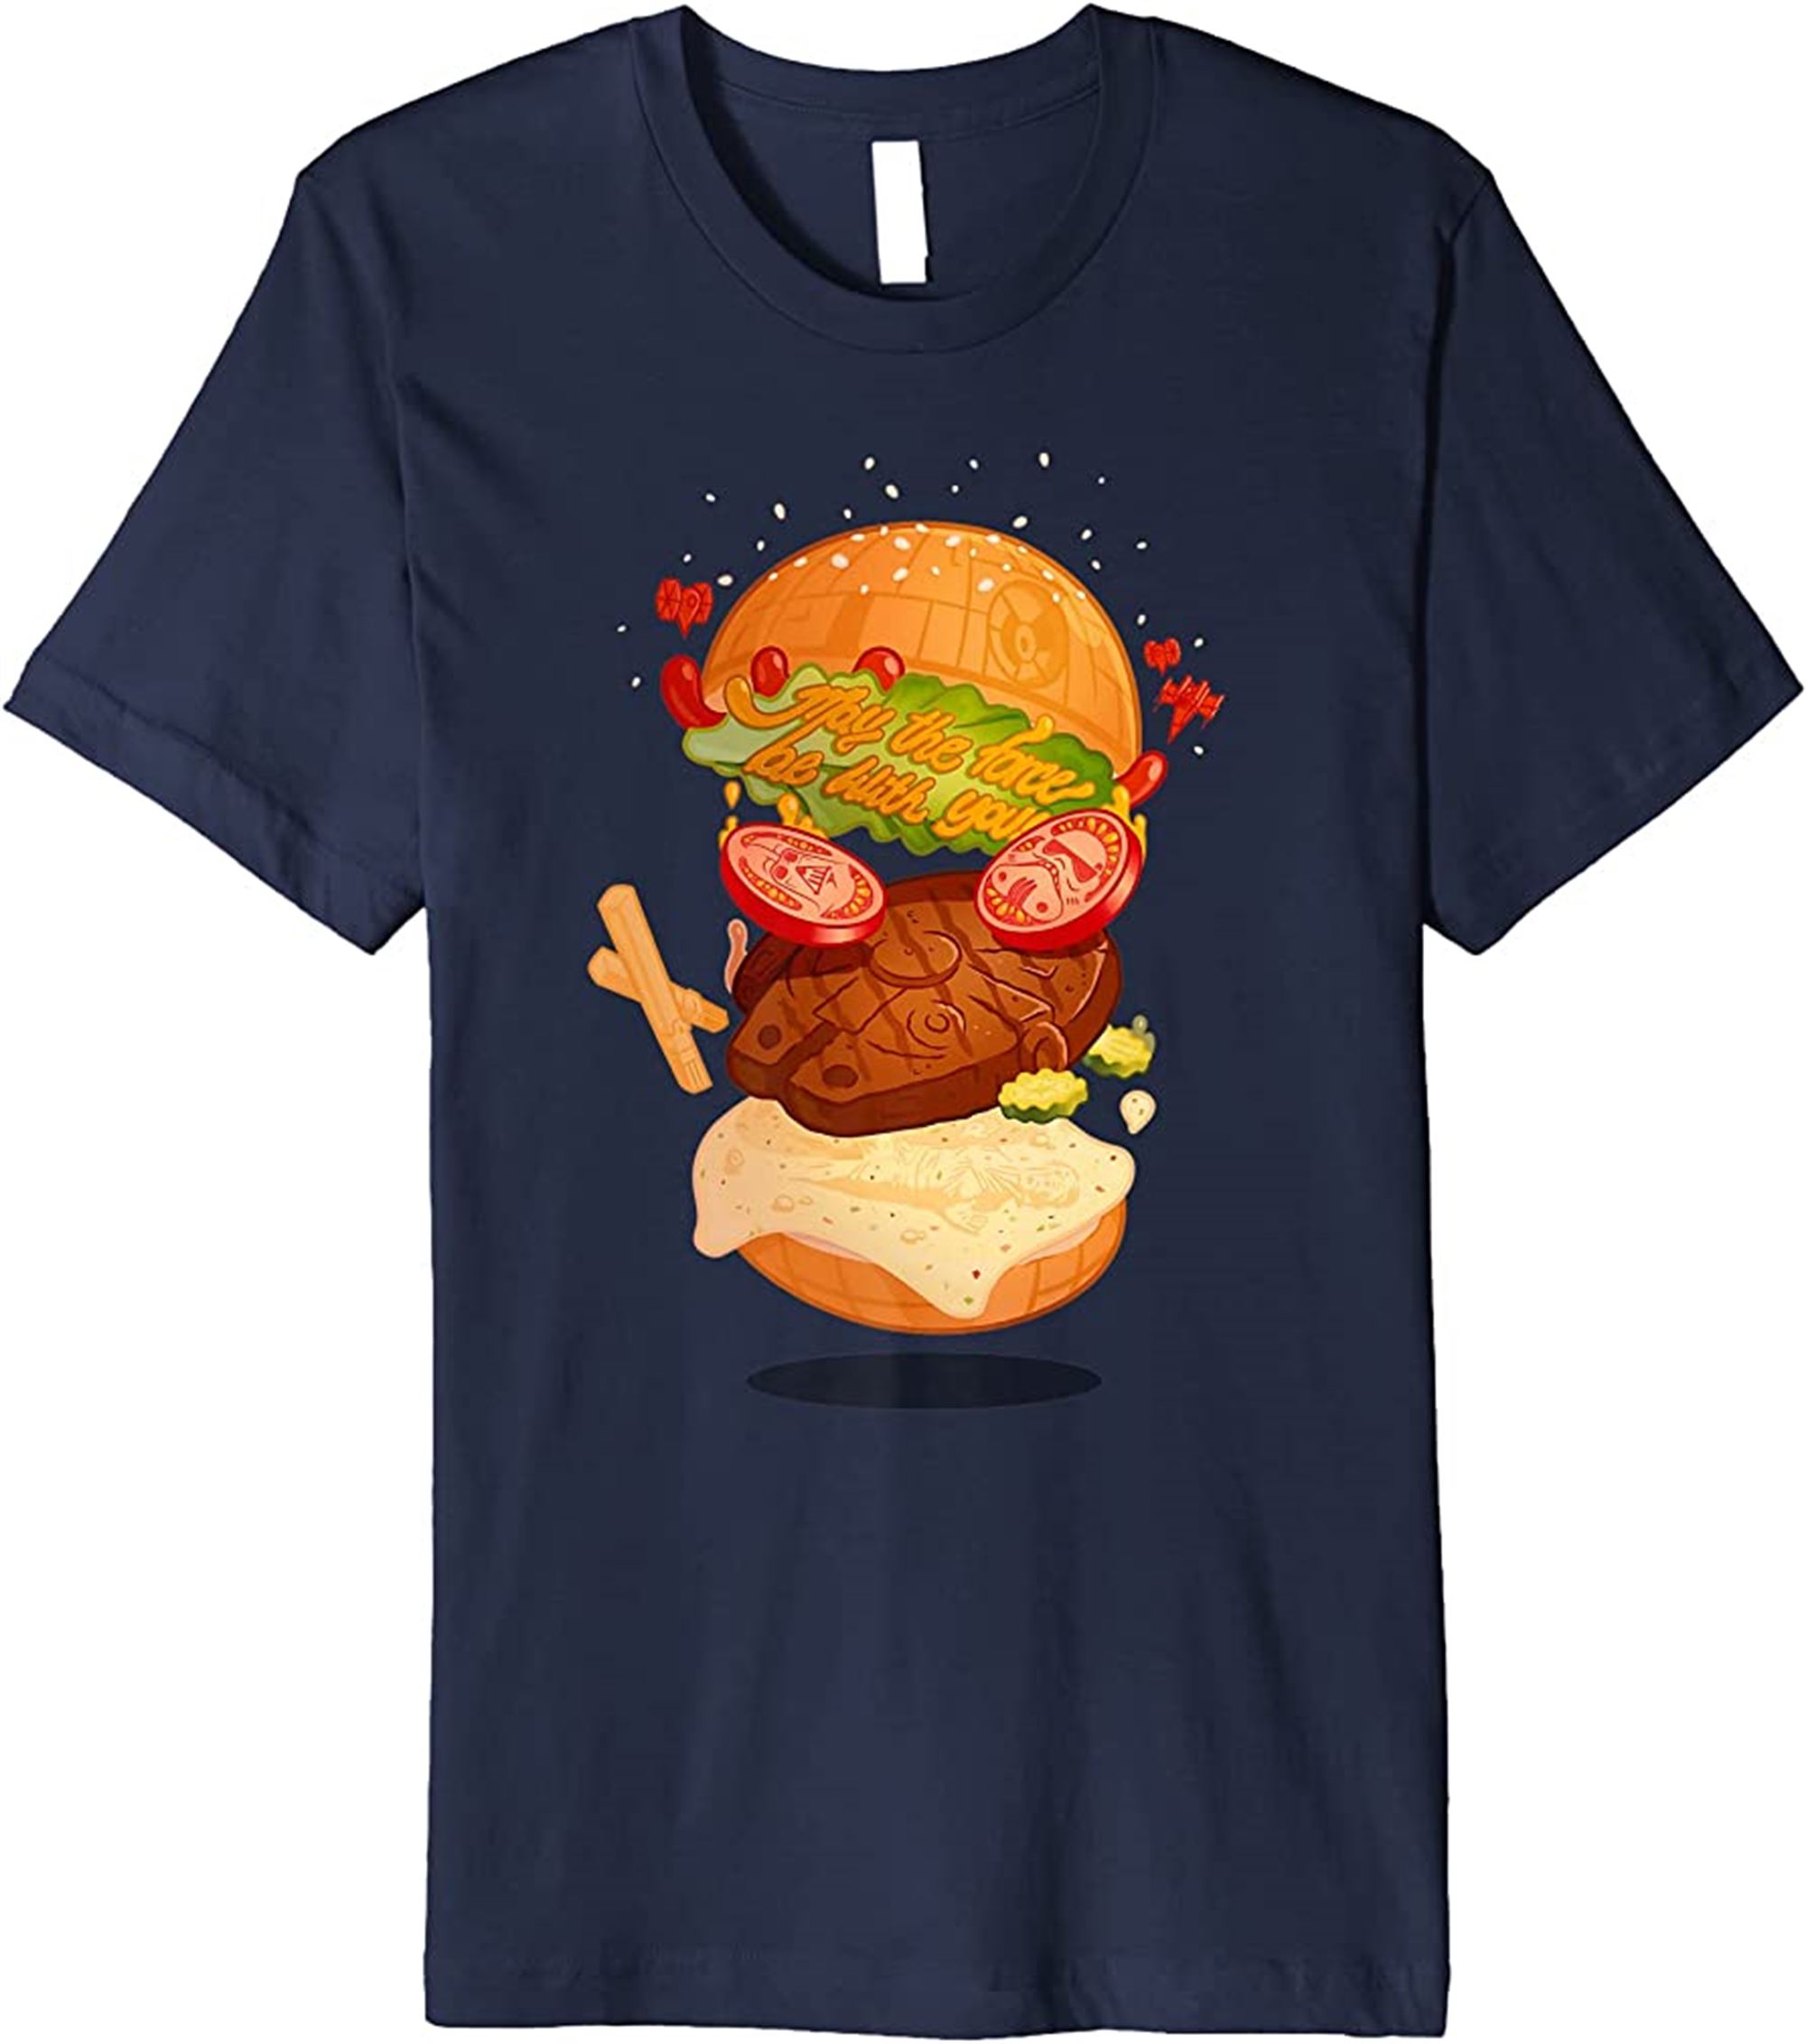 May The Force Be With You Burger Premium T-shirt Plus Size Up To 5xl